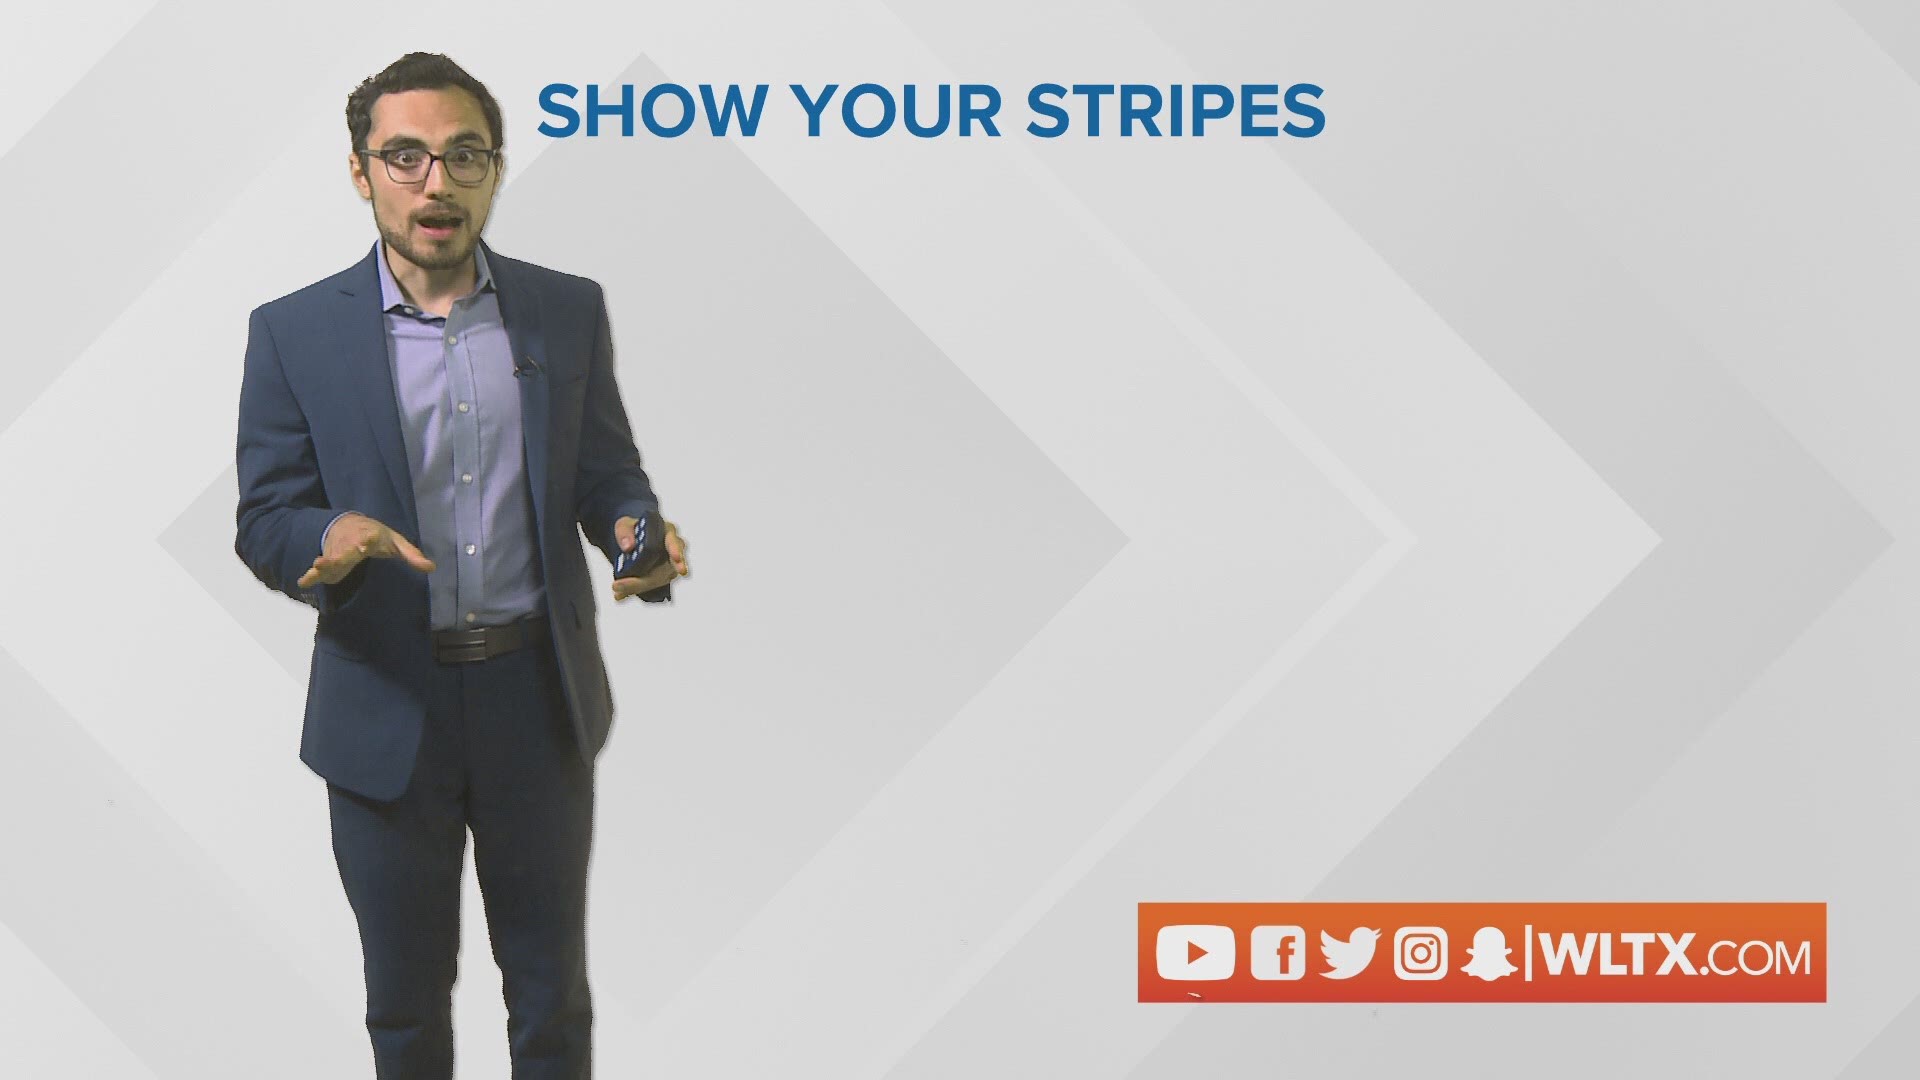 On June 18, Meteorologists across the world are "showing their stripes" to unite on climate change science. Here's how to read the stripes